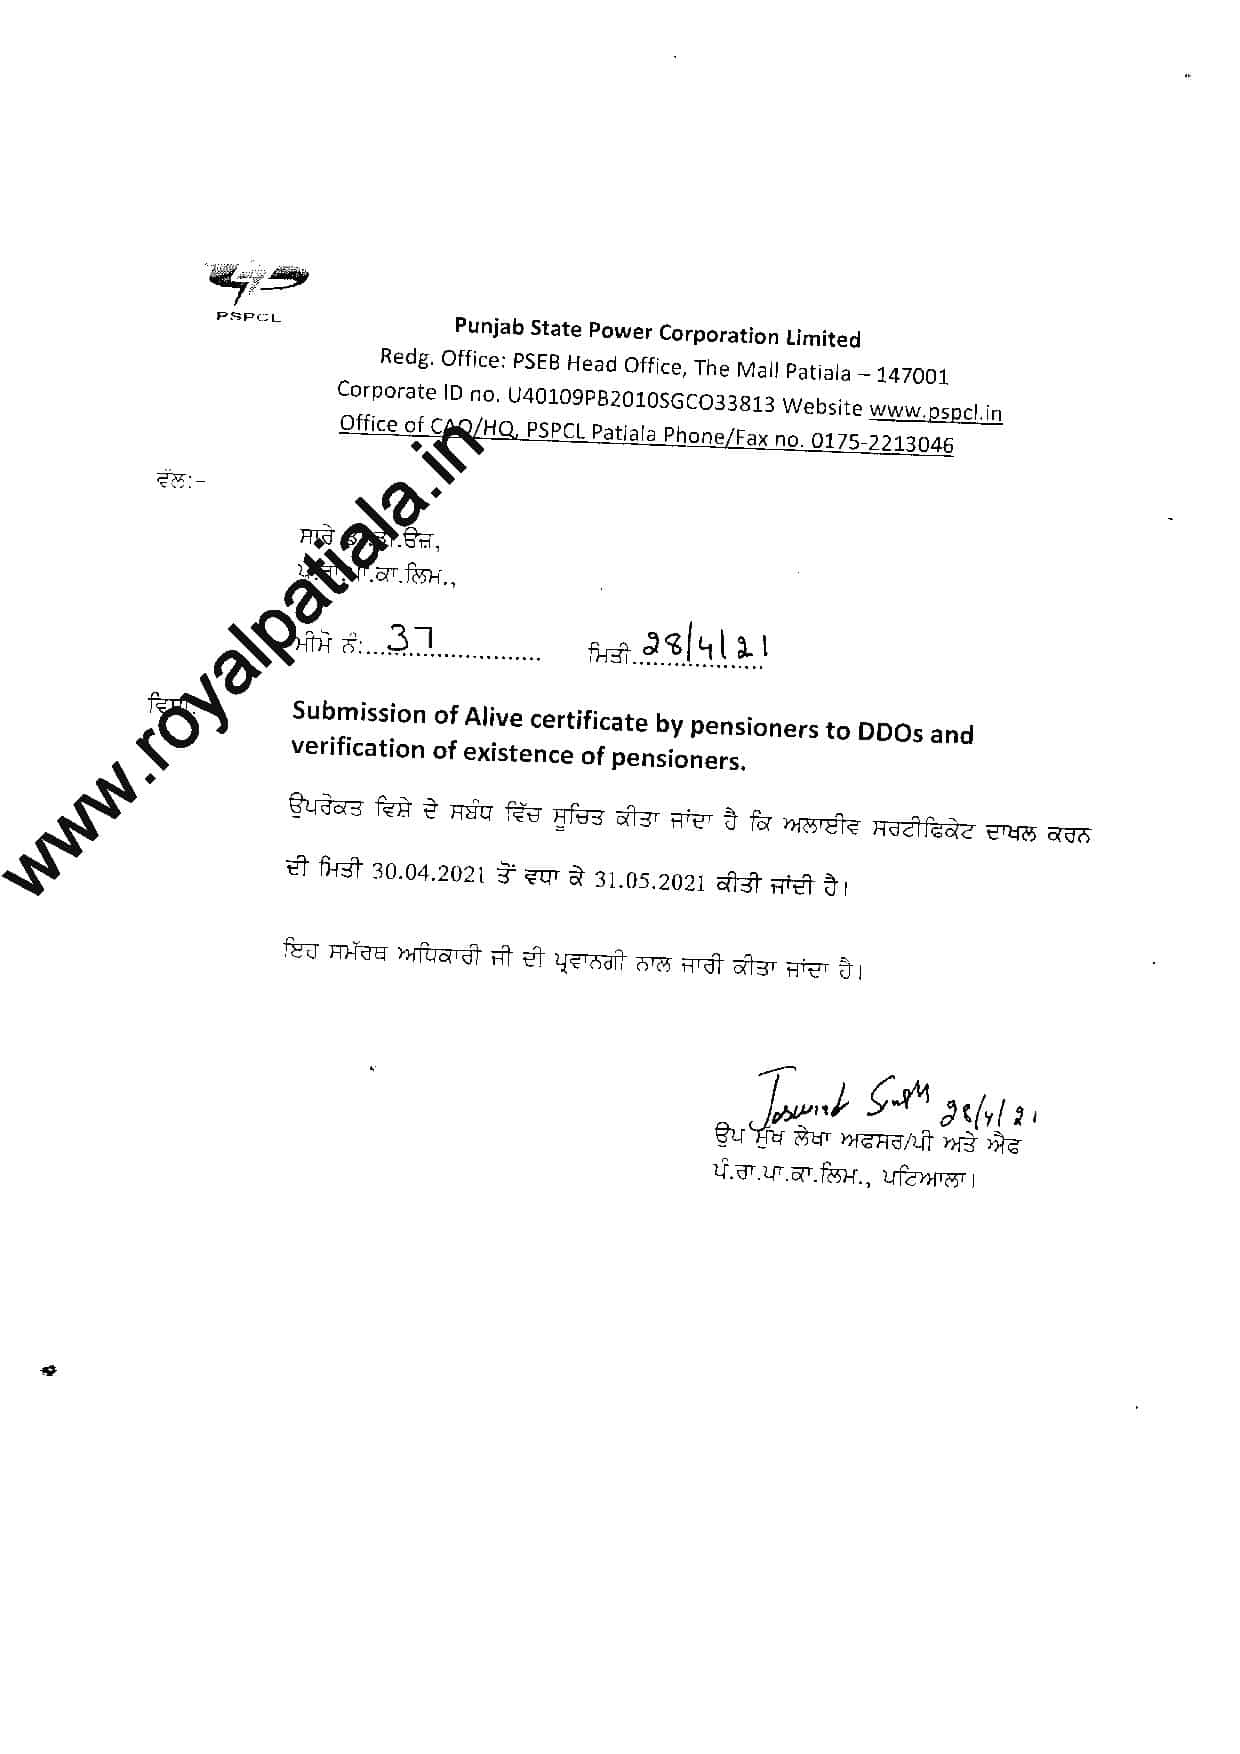 Pensioner’s relief-PSPCL extended alive certificate submission date